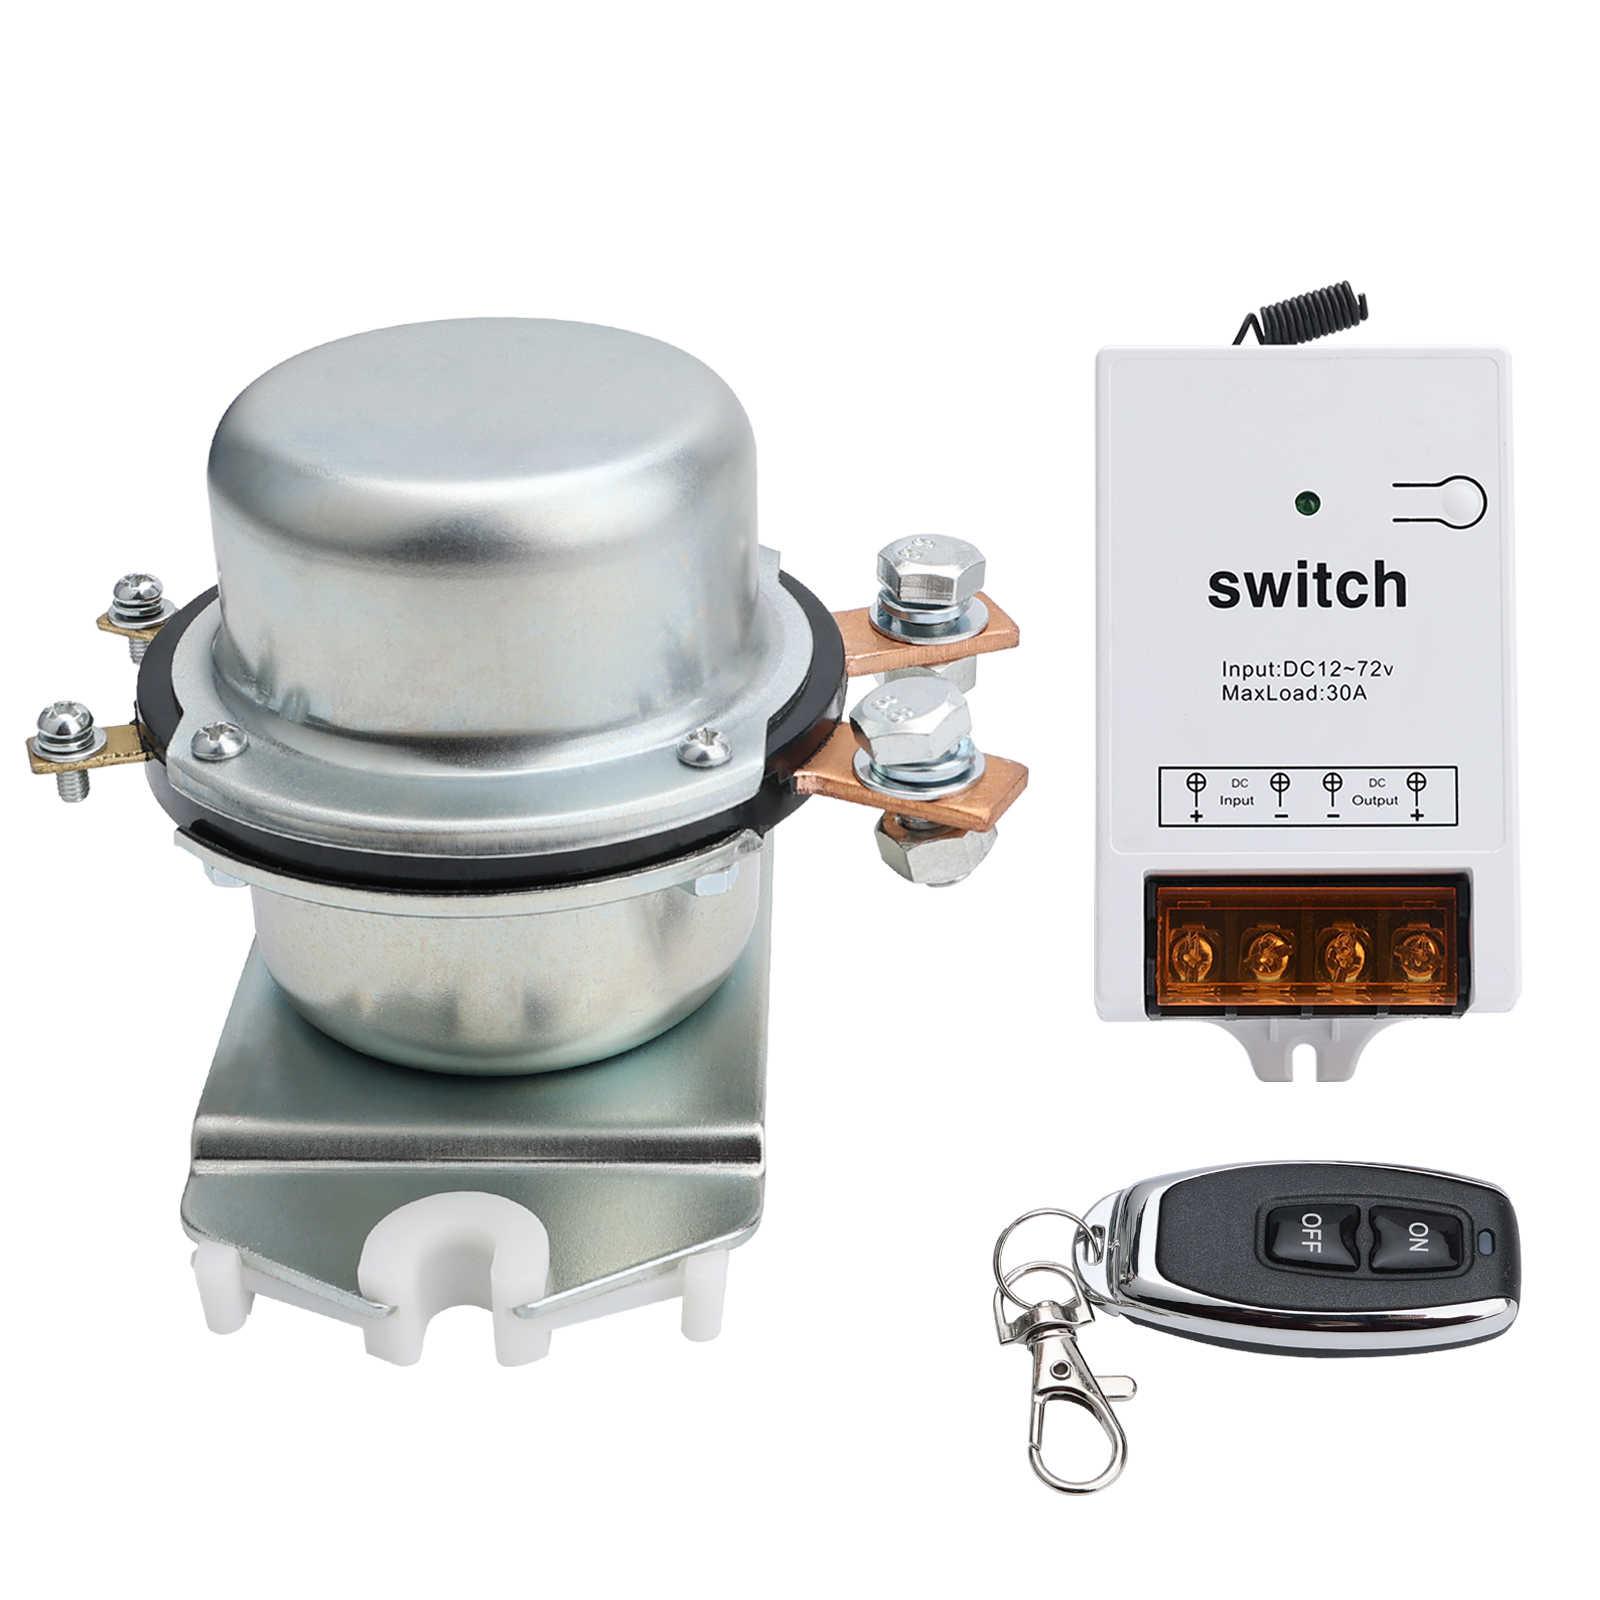 Wireless Remote Control Dual Battery Disconnect Switch Kill Switch for –  Maiker Offroad